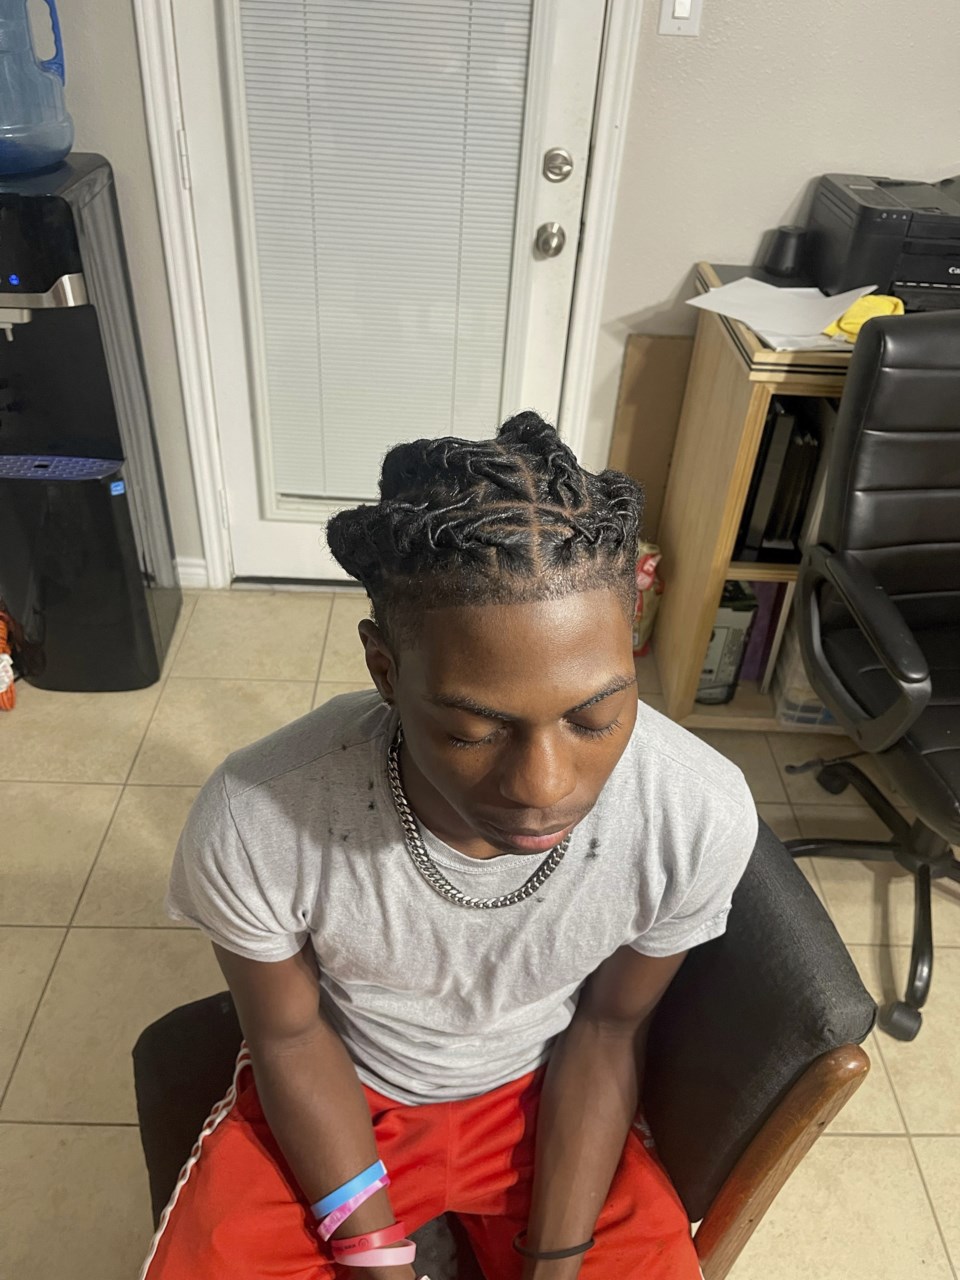 A Black student was suspended for his hairstyle. The school says it ...